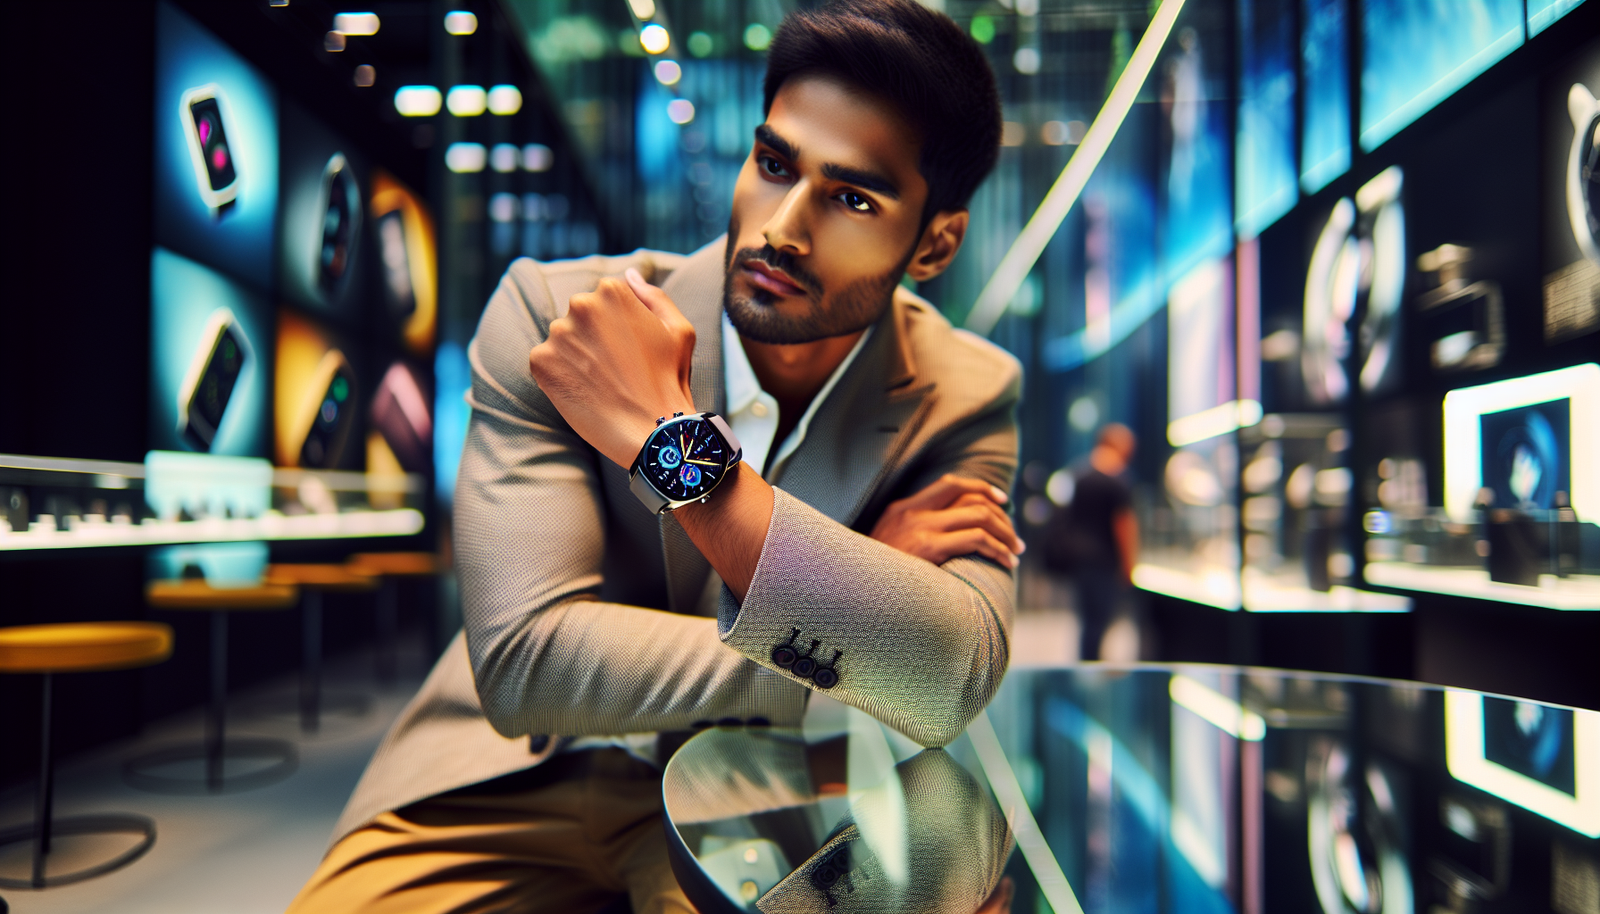 A Guide to Fashion Smartwatches